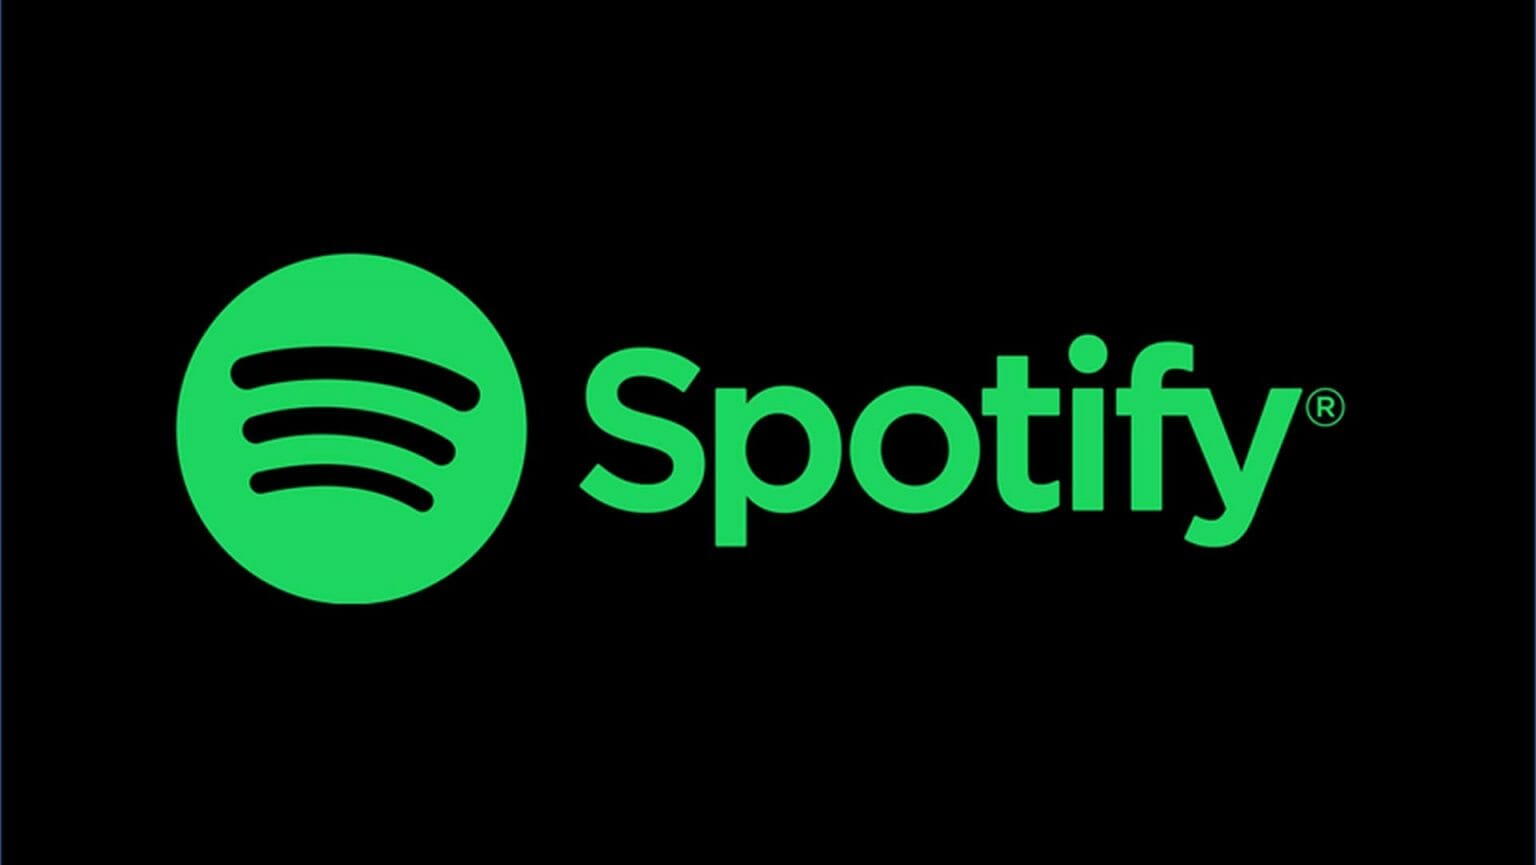 Spotify expands into Ghana, Nigeria, Kenya, other African countries